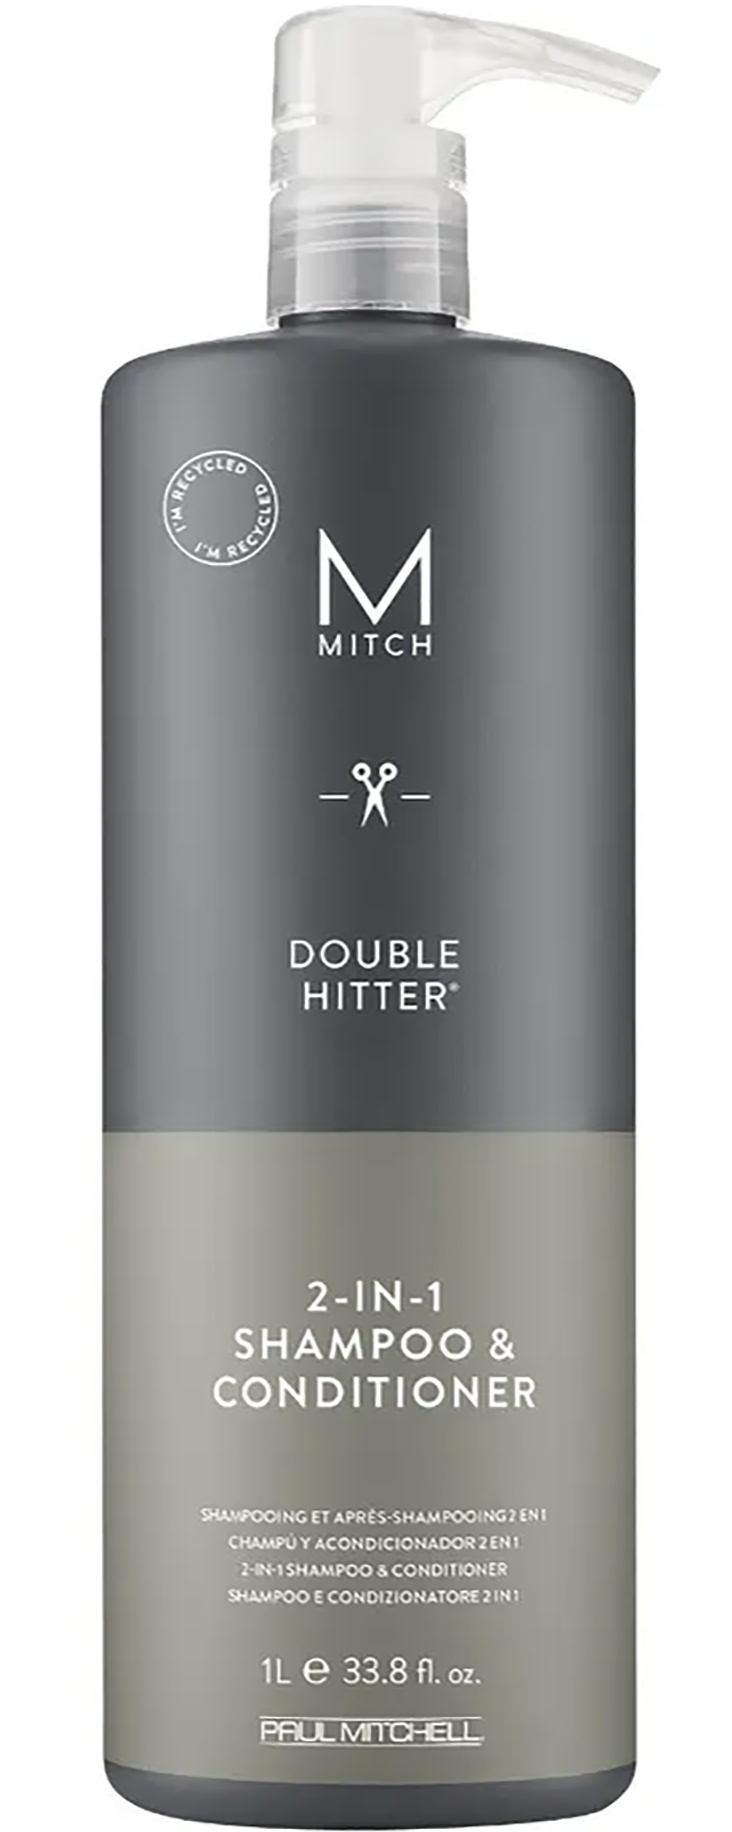 Paul Mitchell Double Hitter 2-in-1 Shampoo & Conditioner